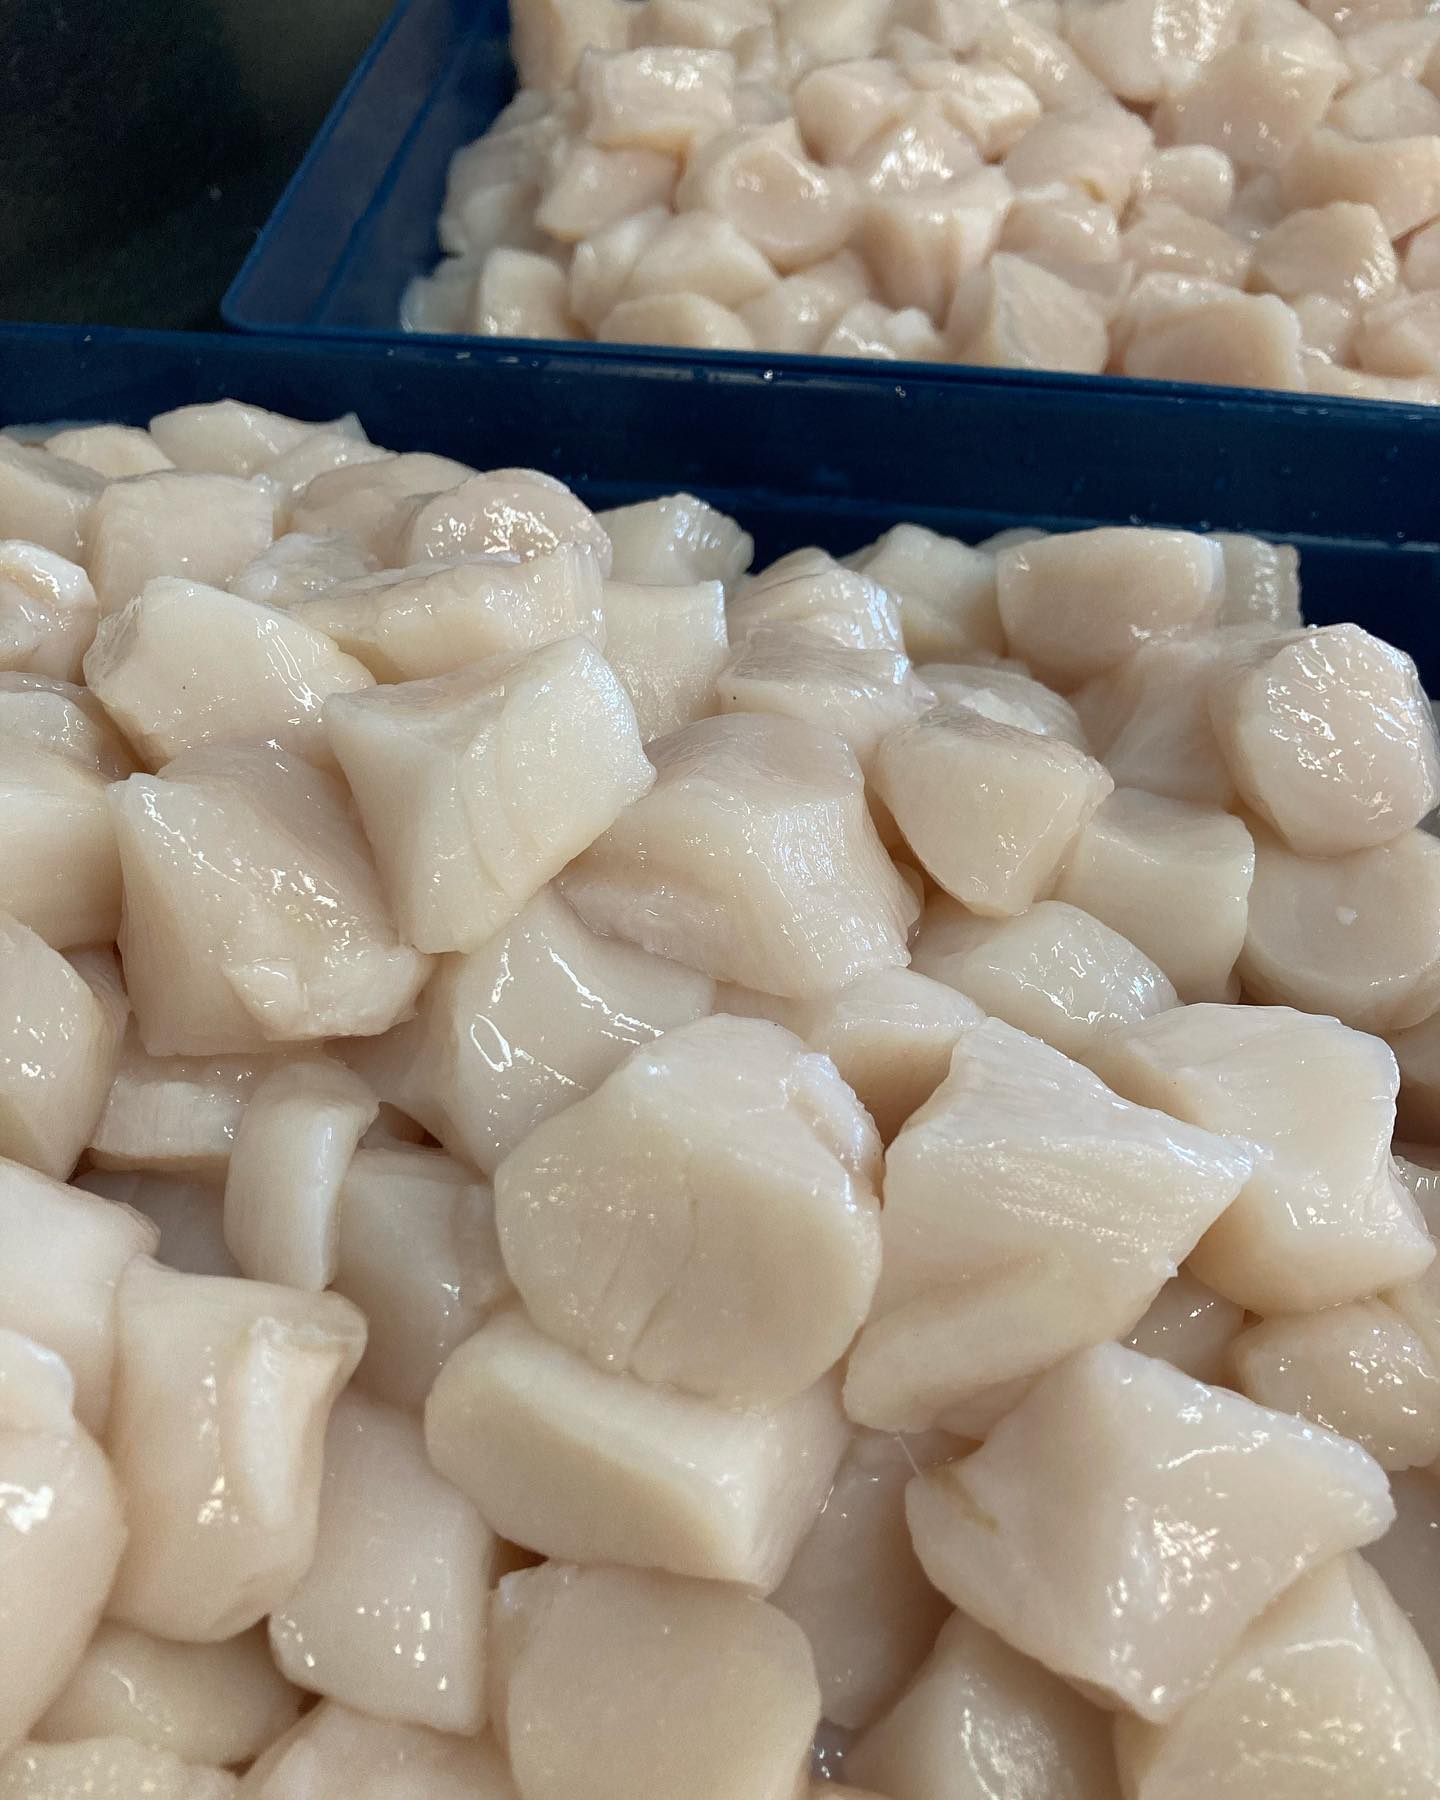 Beautiful Dayboat Sea Scallops from the FV “Midnight Our” out of Harwichport. Just as delicious as they look!